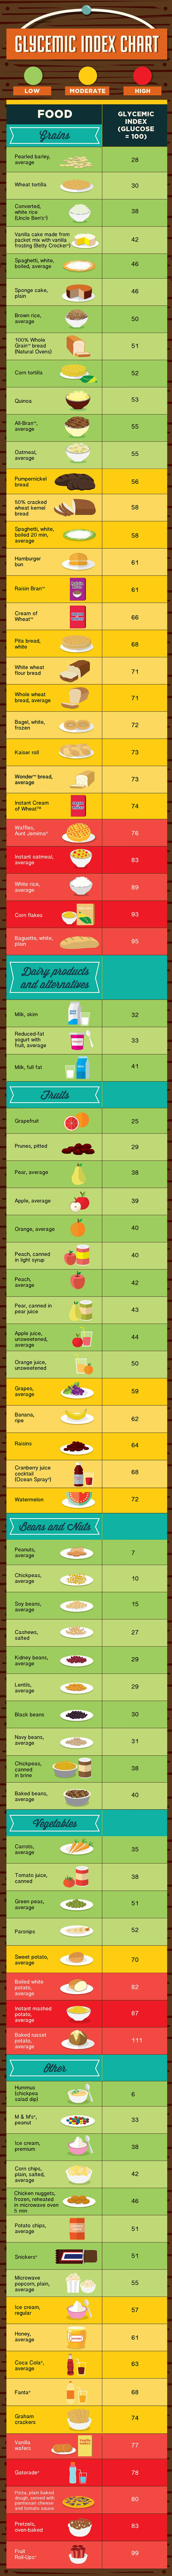 Glycemic Index Chart